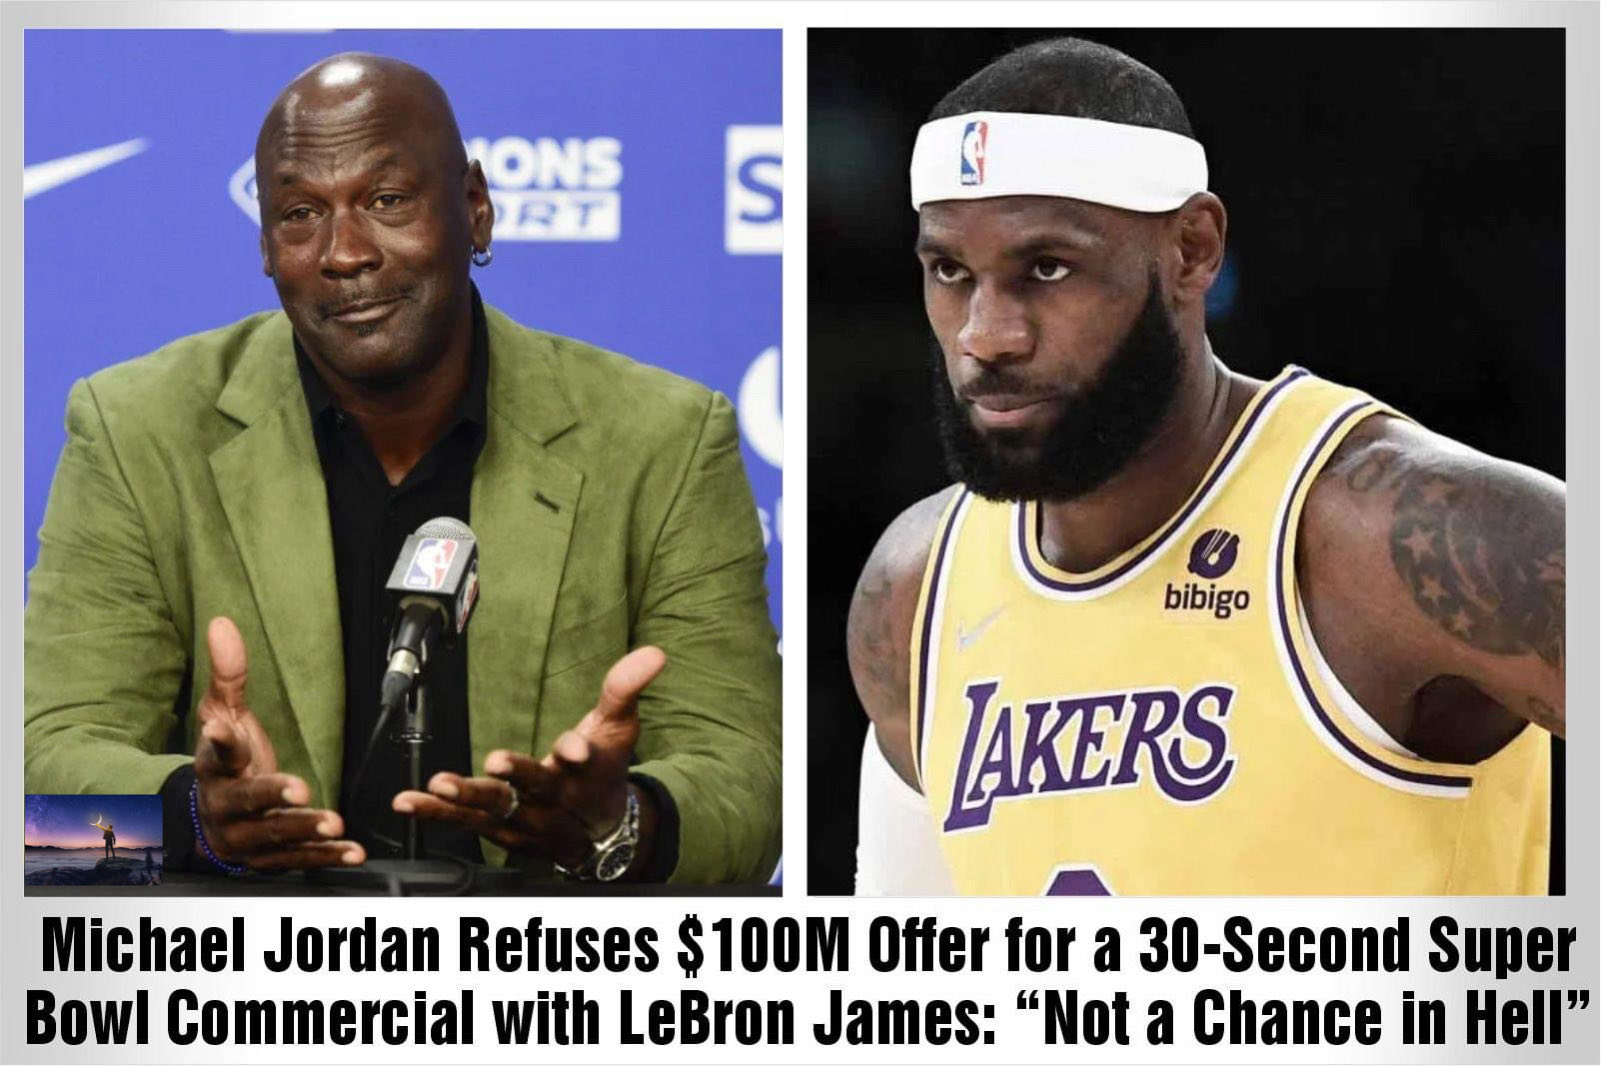 Michael Jordan Refuses $100M for a 30-Second Super Bowl Spot With Lebron James: “Not On Your